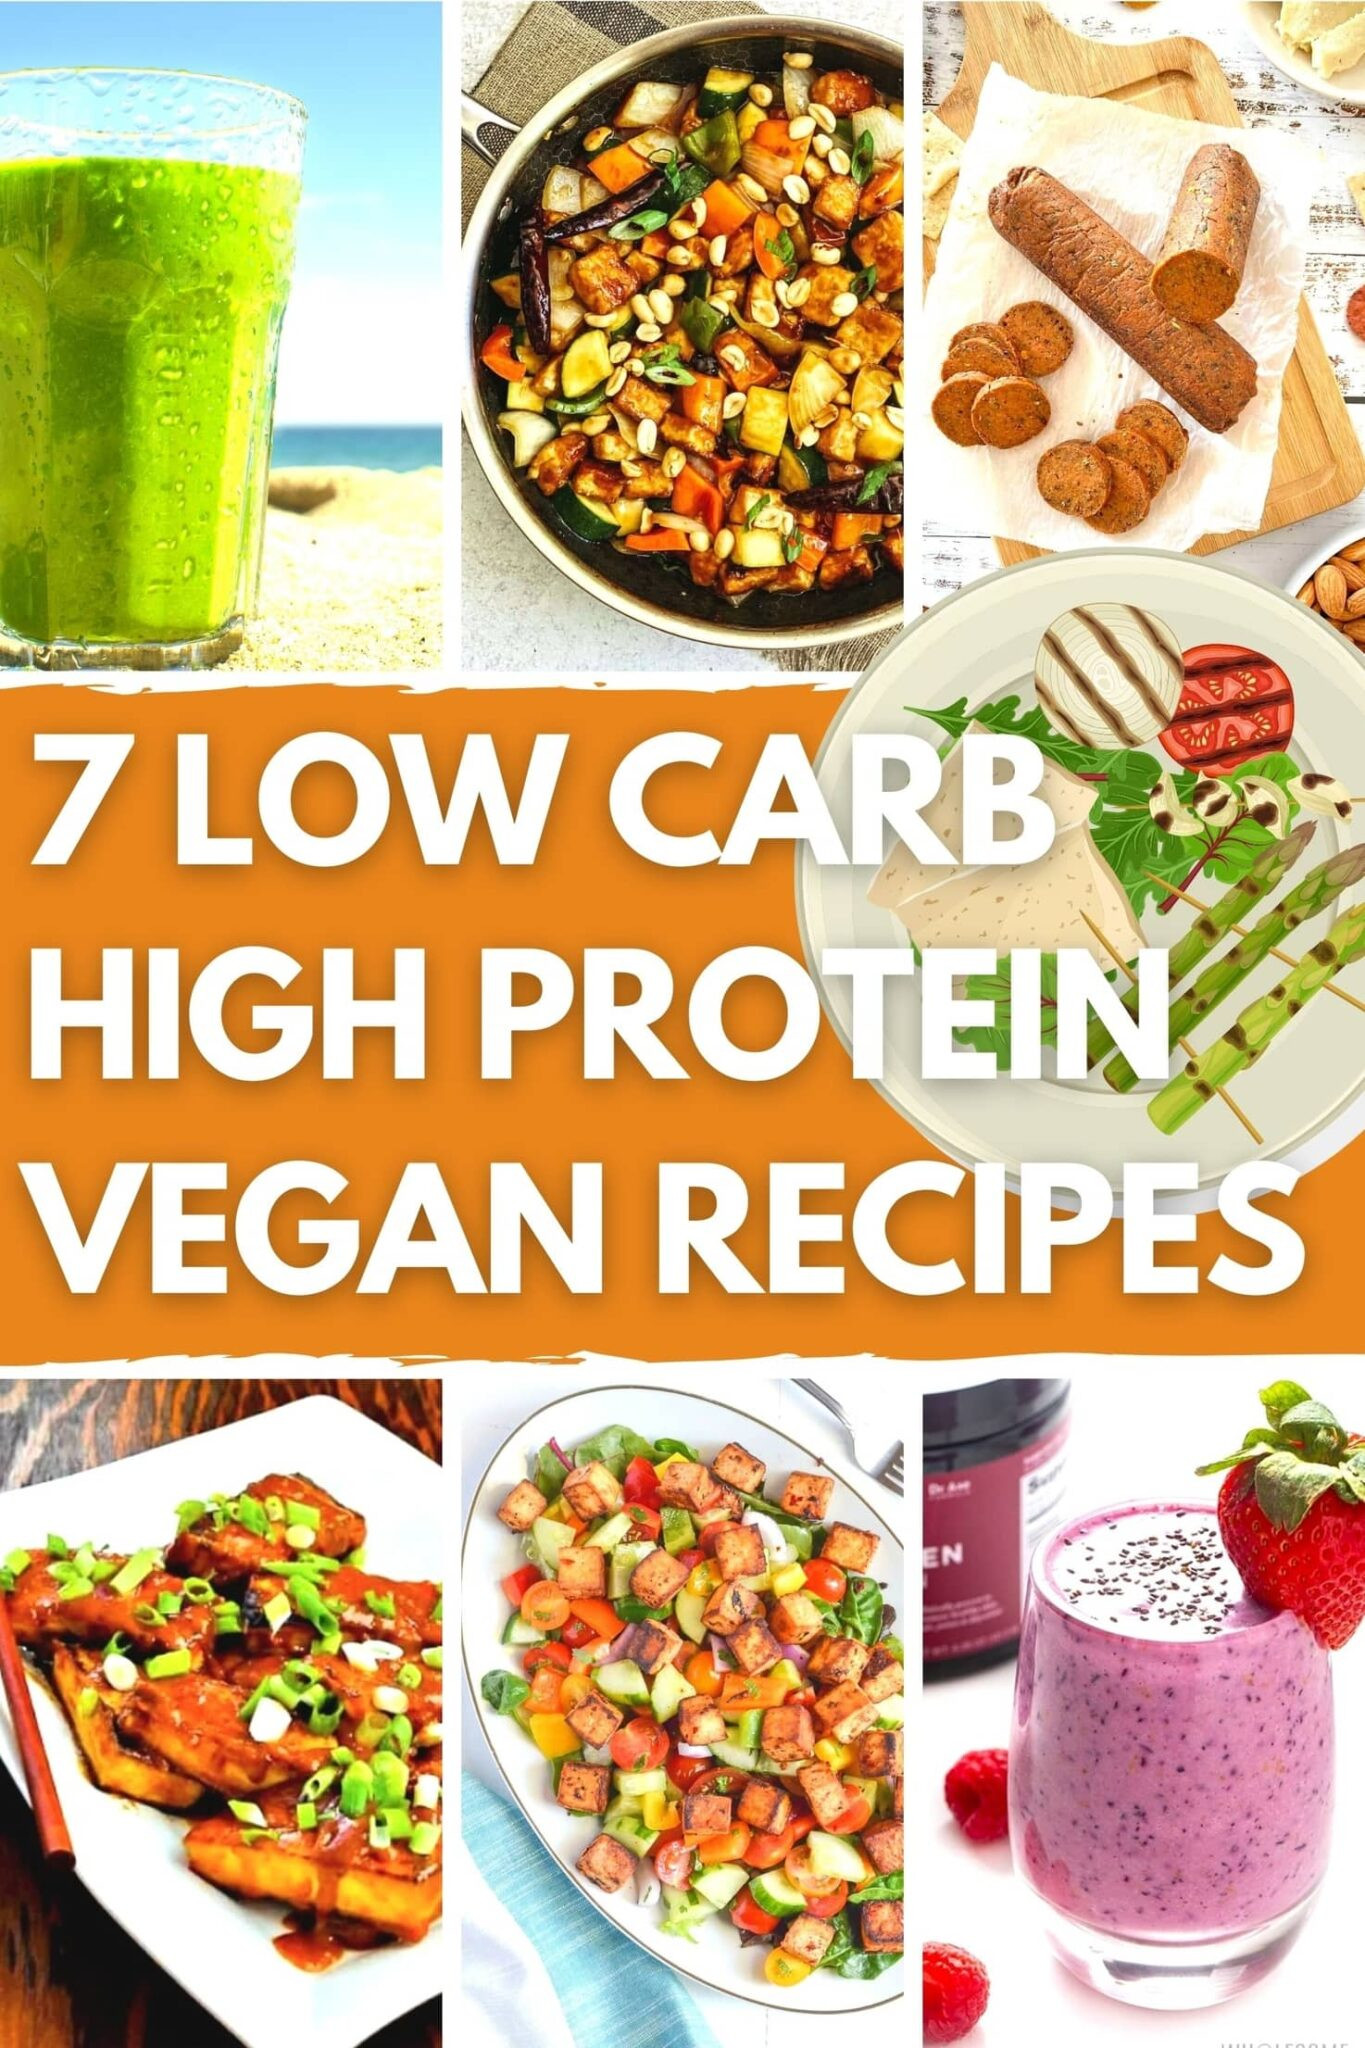 High Protein Low Carb Diet Recipes Lovely 7 Simple Low Carb High Protein Vegan Recipes